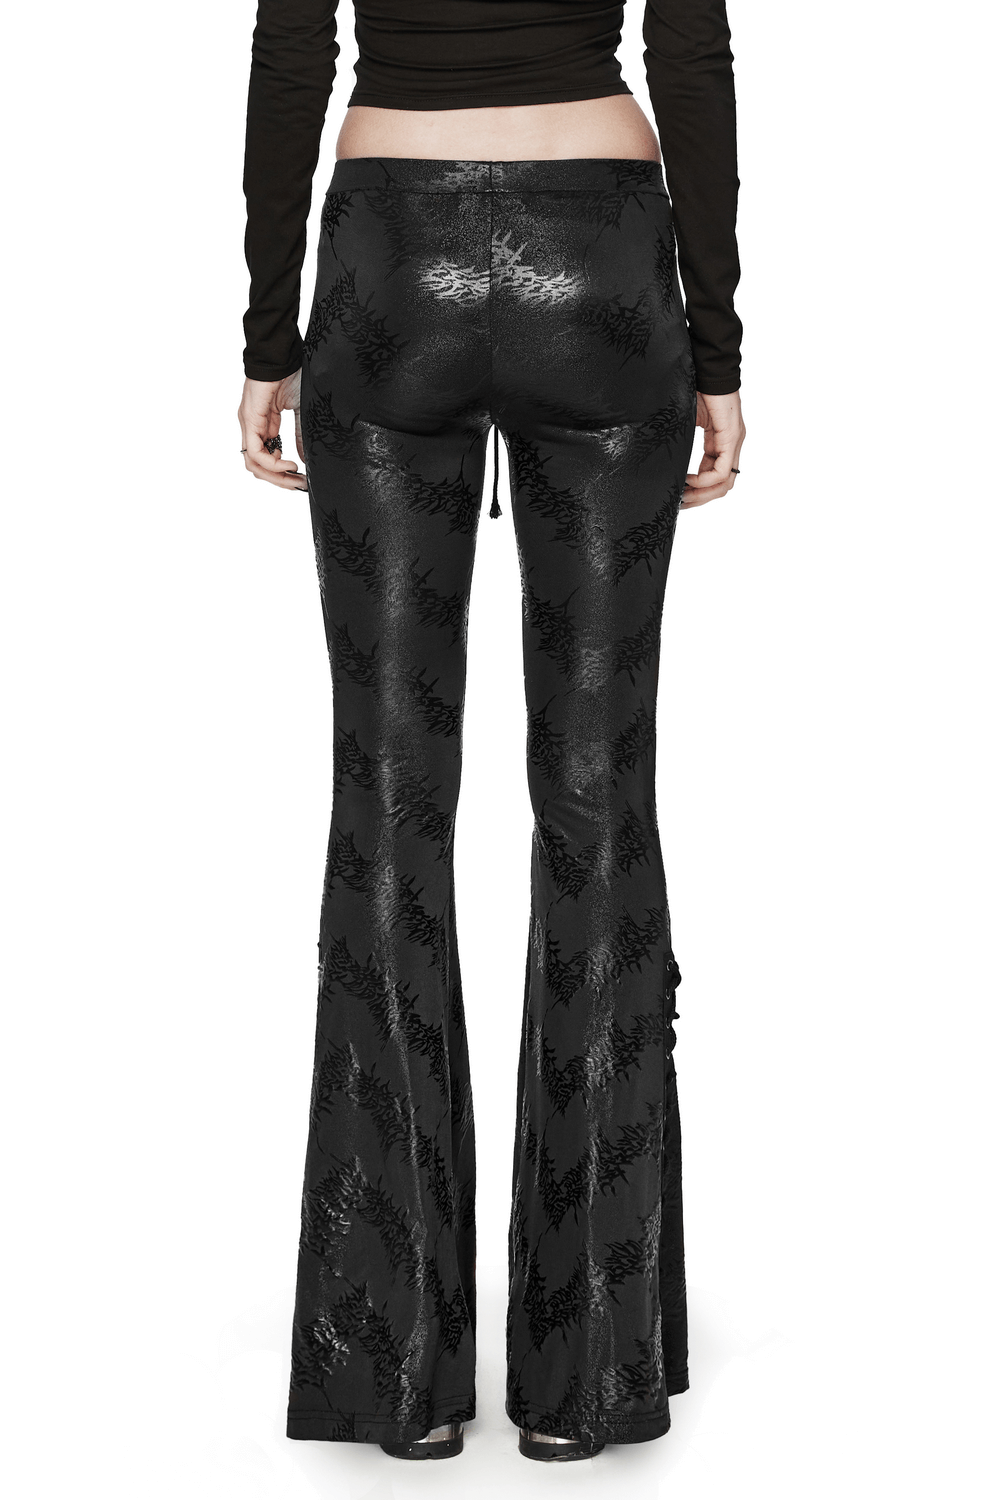 Stylish Lace-Up Flared Pants with Sparkling Tree Texture